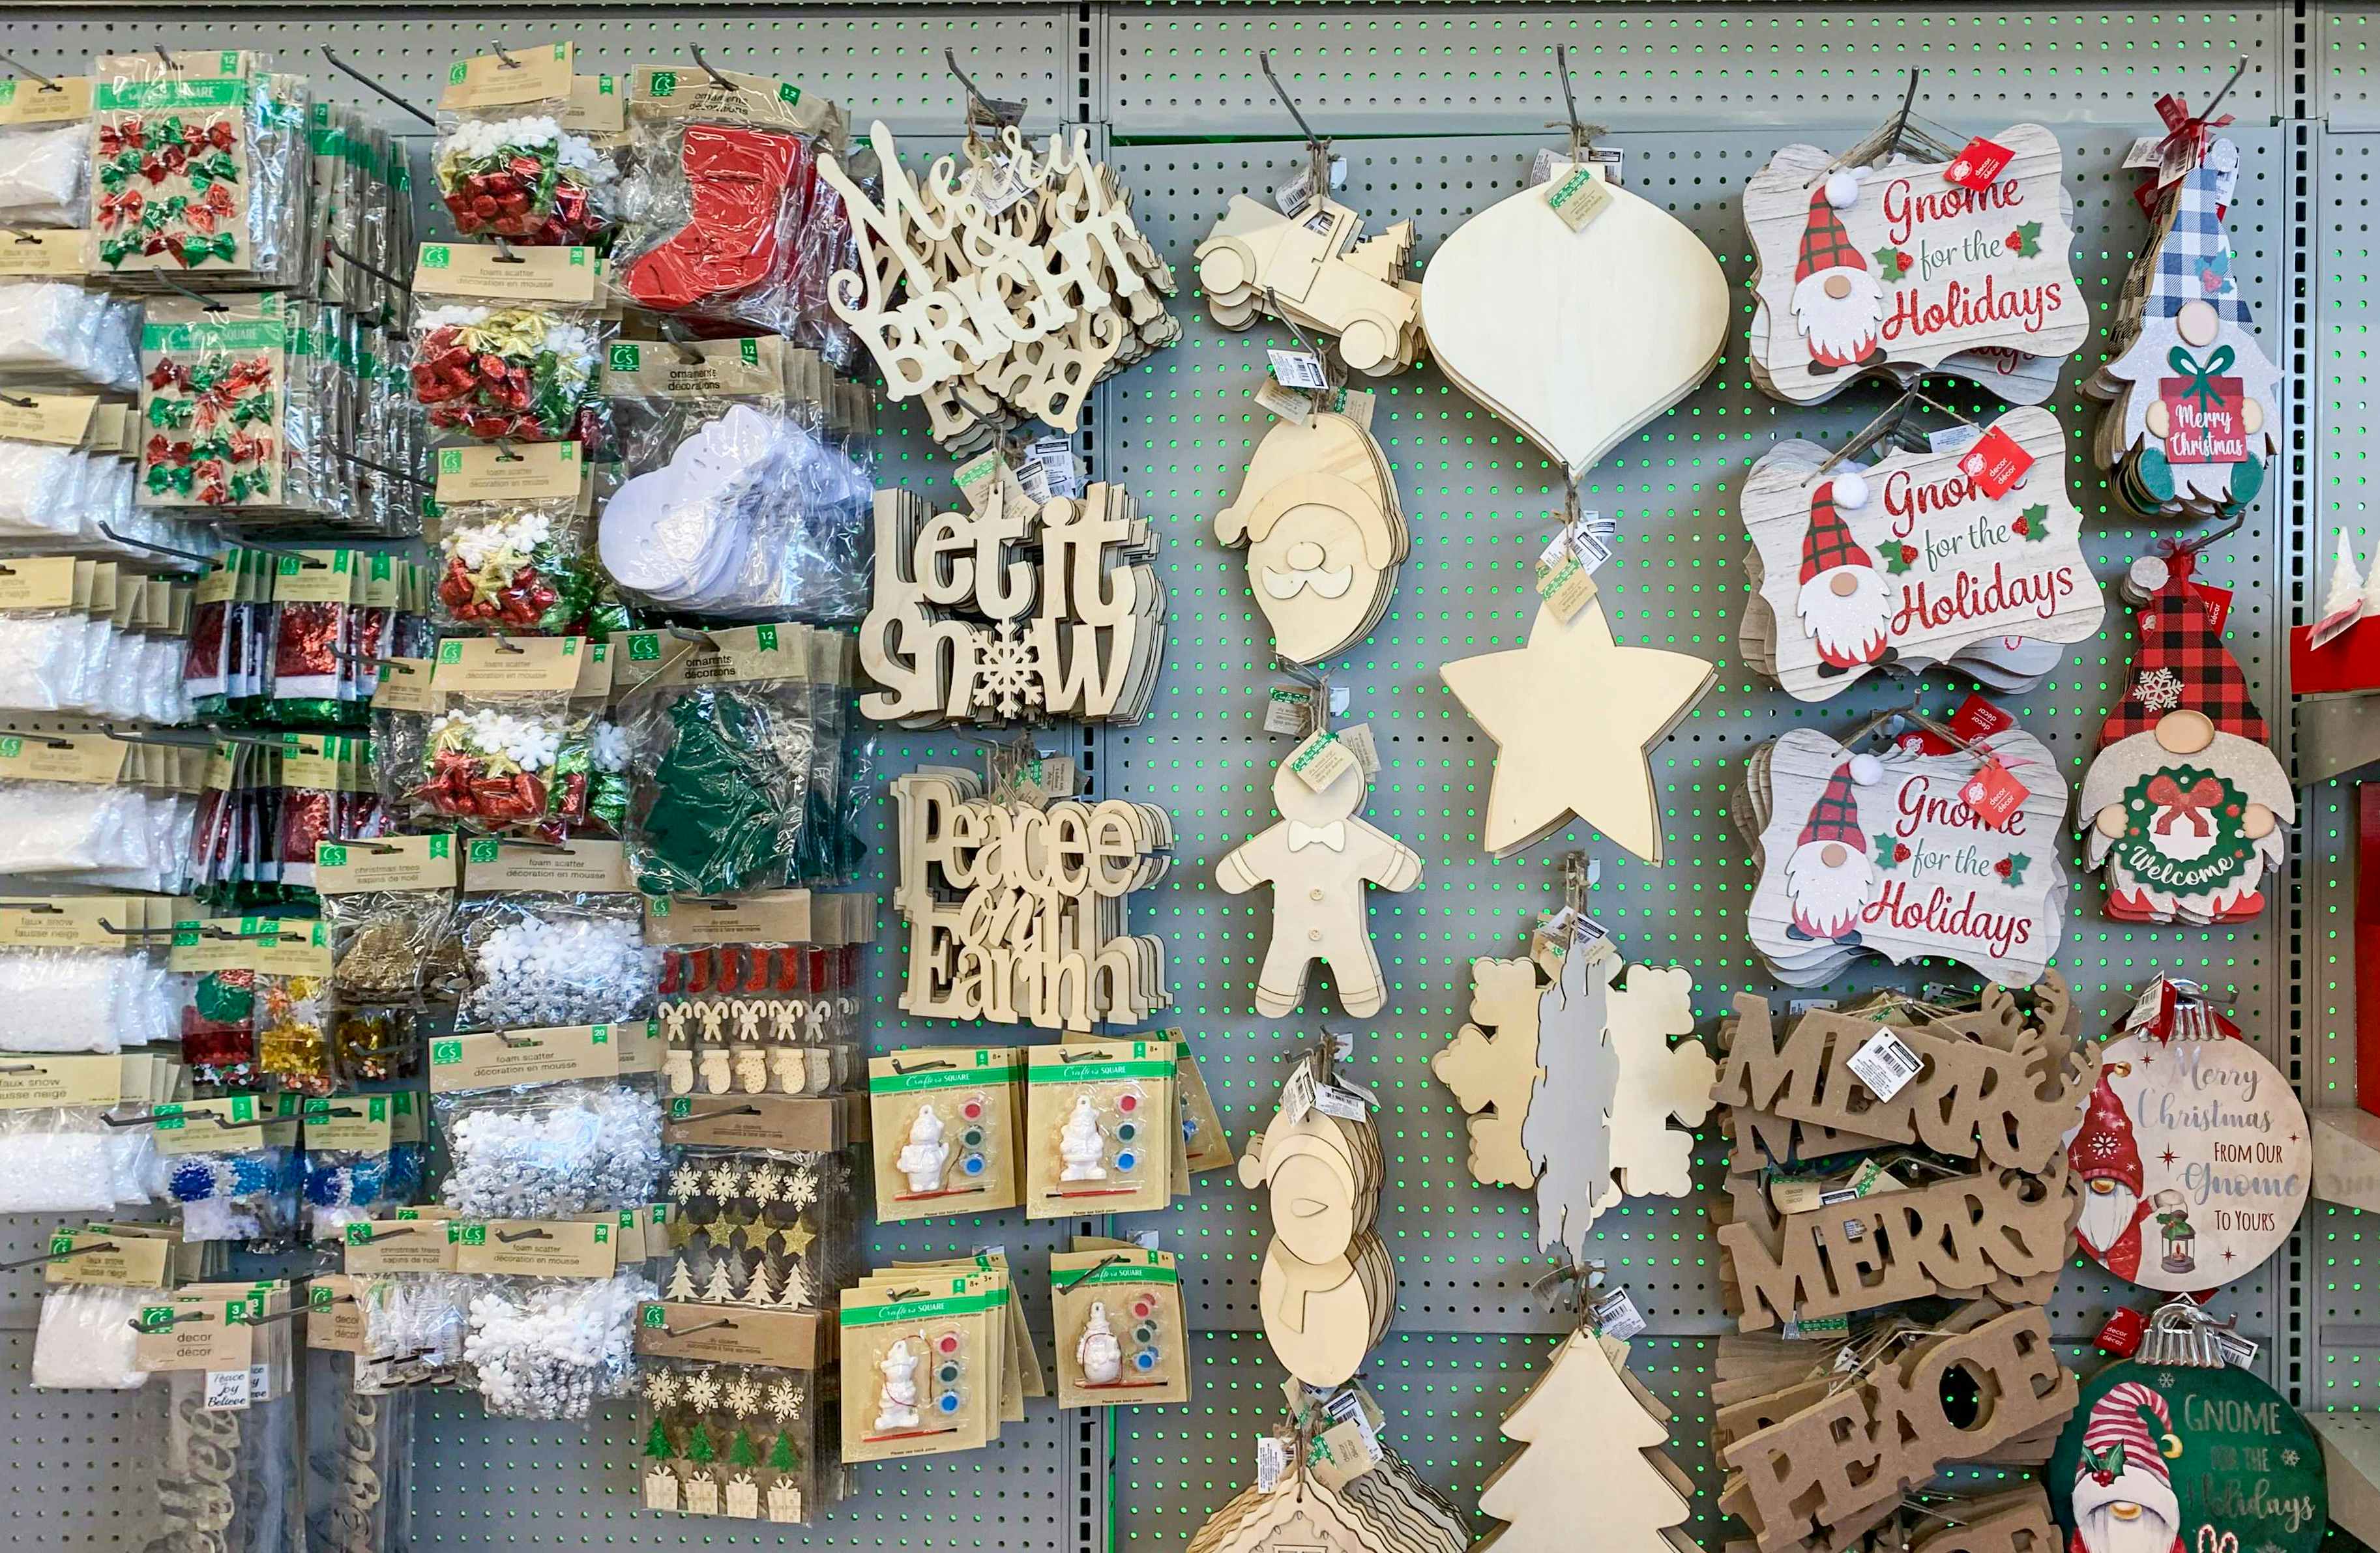 100 Cute and Creative Dollar Tree Christmas Crafts for Adults